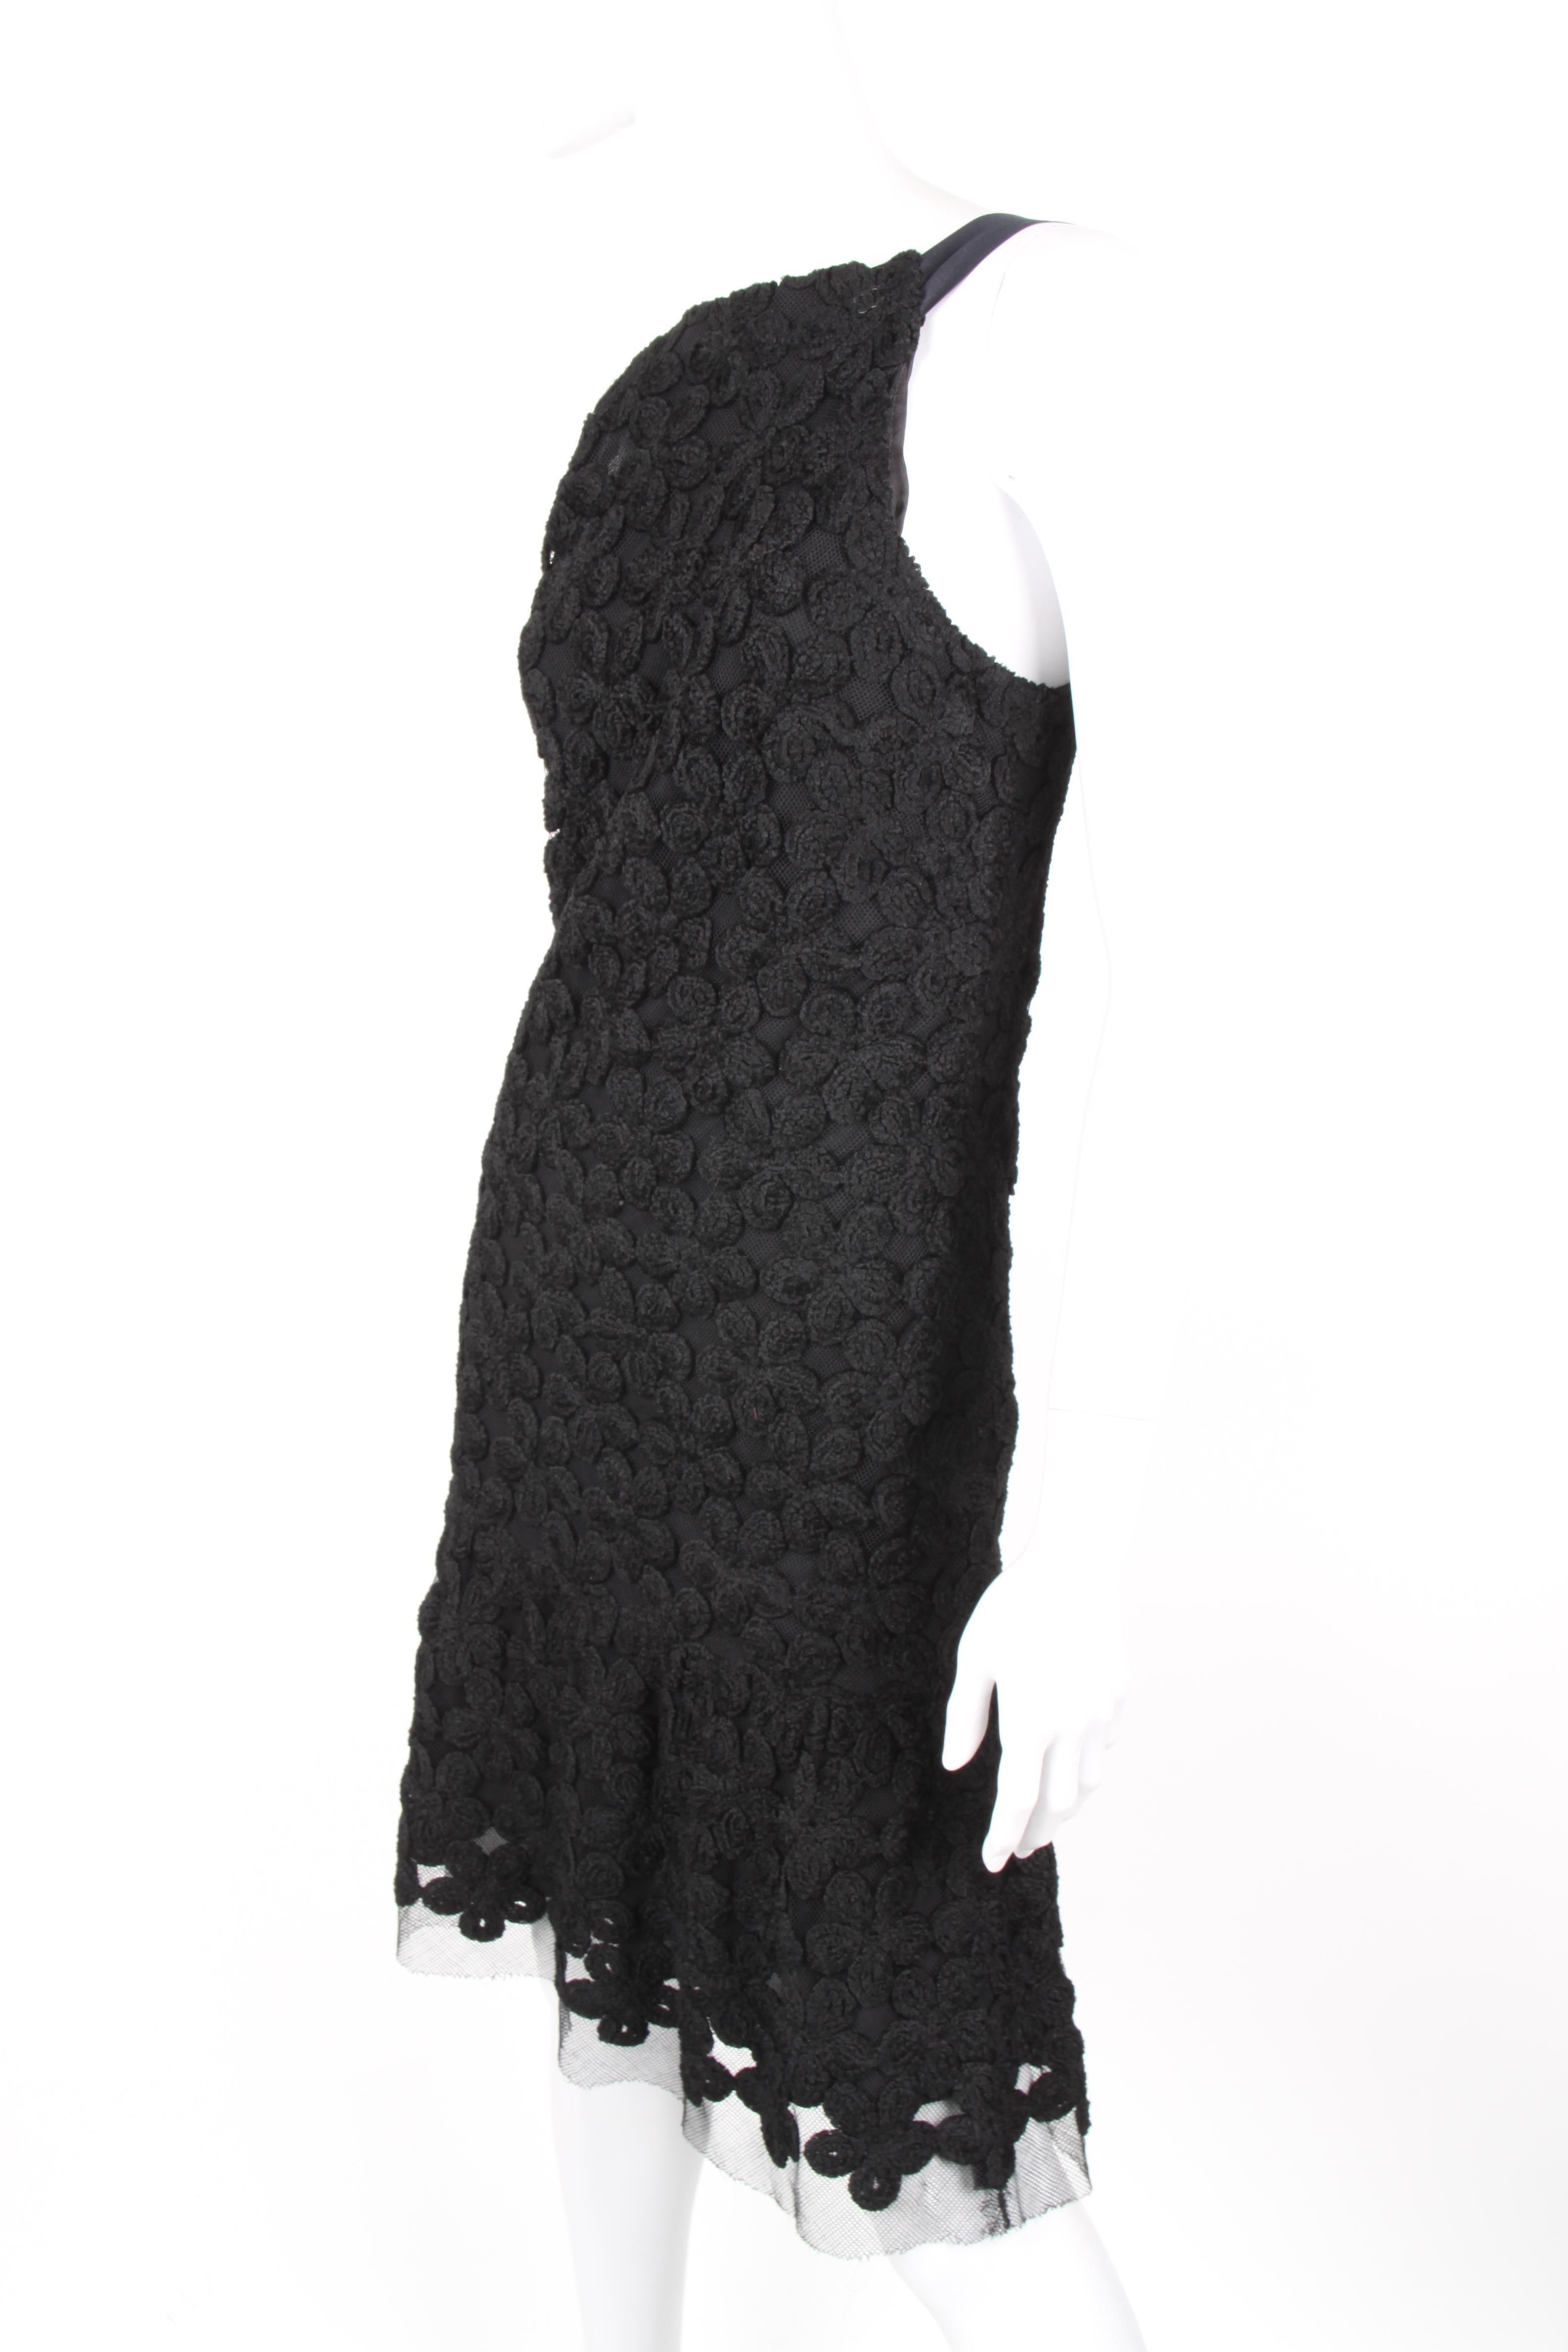 Chanel Fall/Winter 2005 Black Floral Crotchet Camelia Wool Mesh Dress For Sale 2